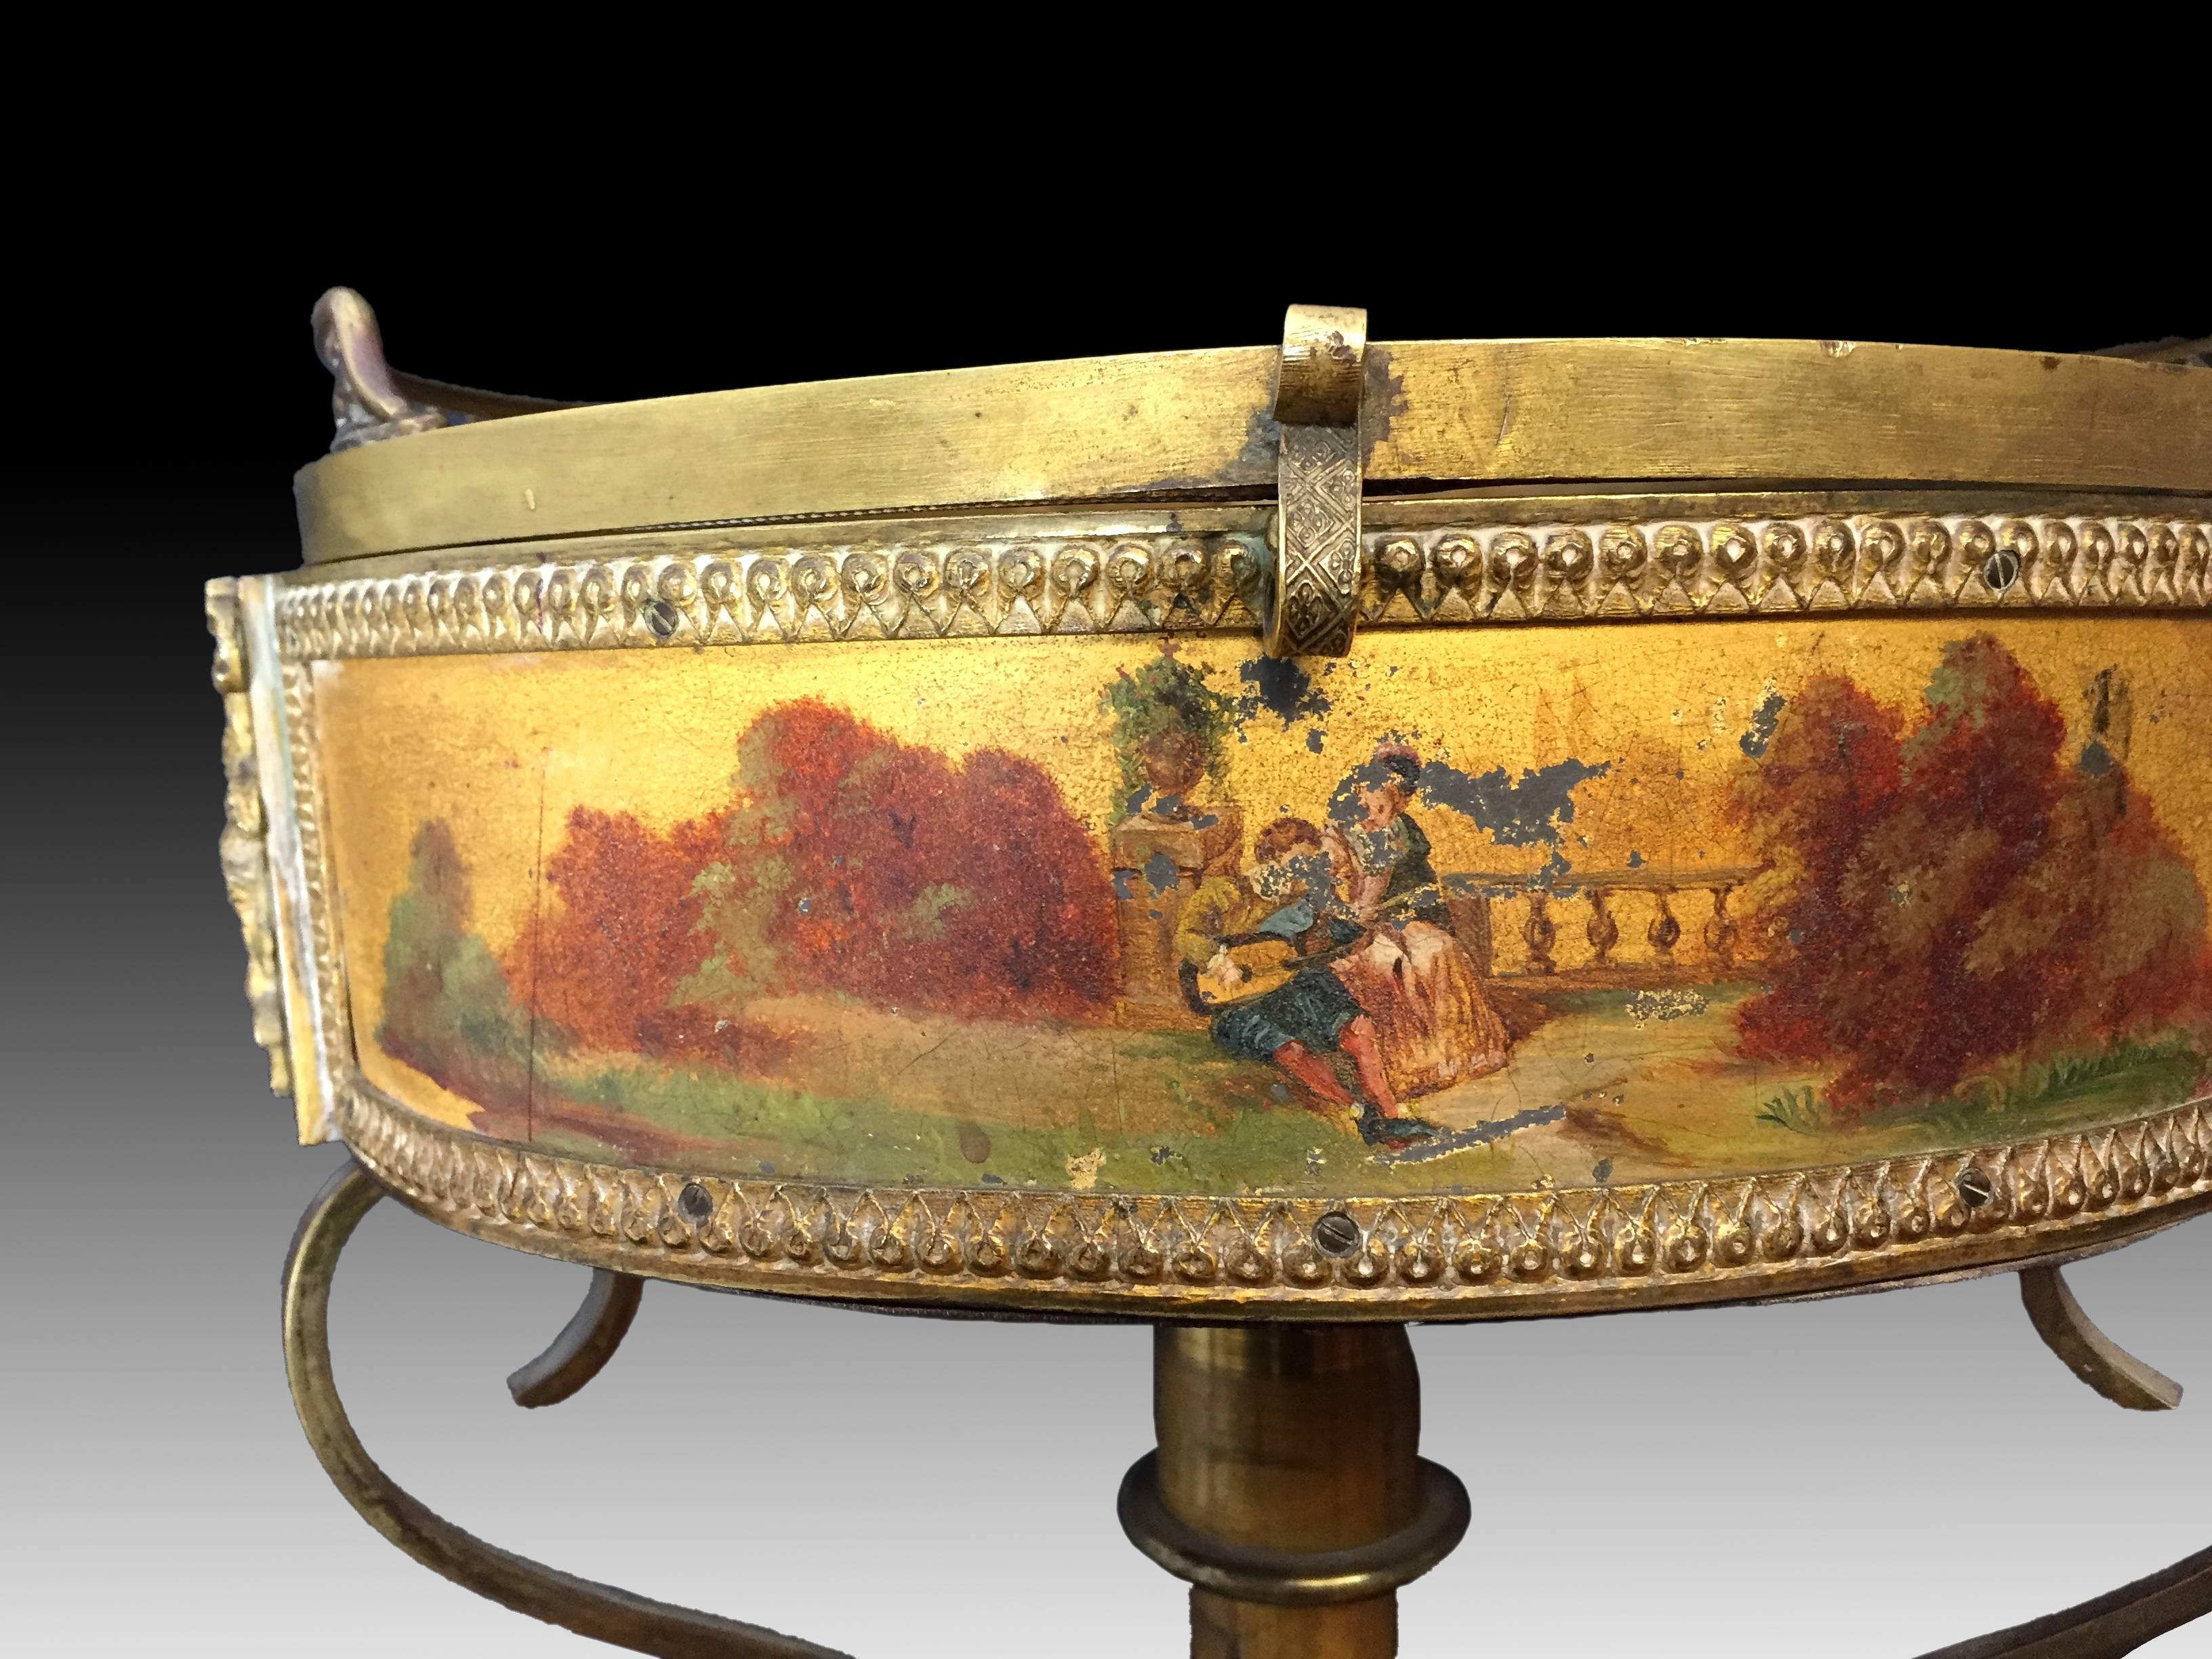 Gueridon showcase in polychromed and gilded bronze, France, Napoleon III, about the third third of the 19th century. The small circular table shows a top panel in transparent glass, which shows the interior upholstered, and the waist decorated with